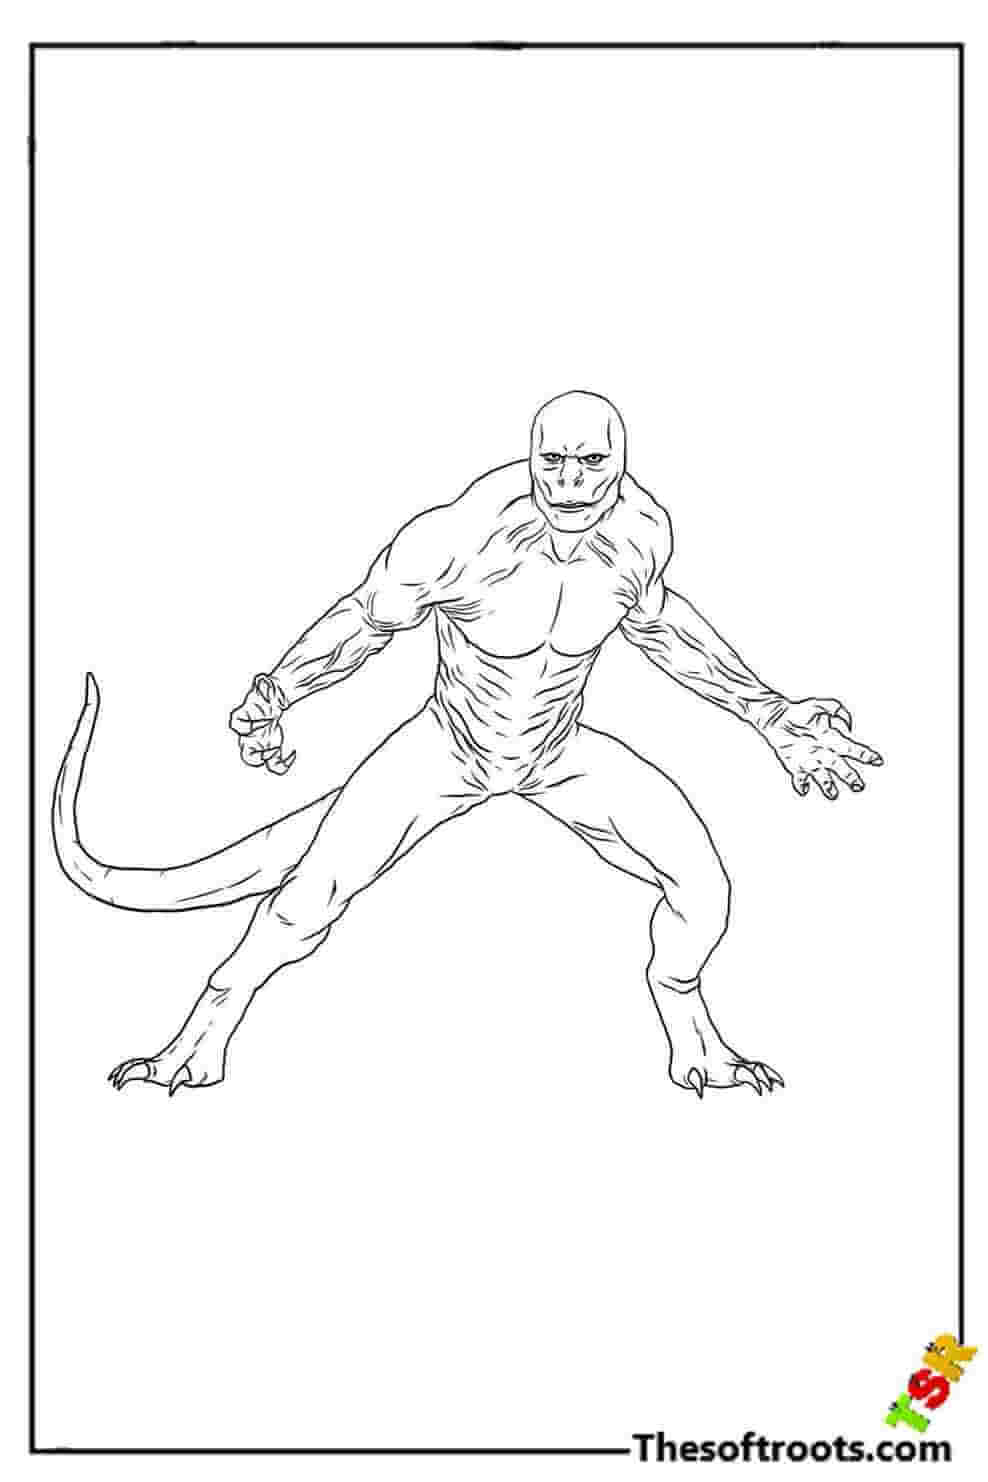 Lizard man coloring pages